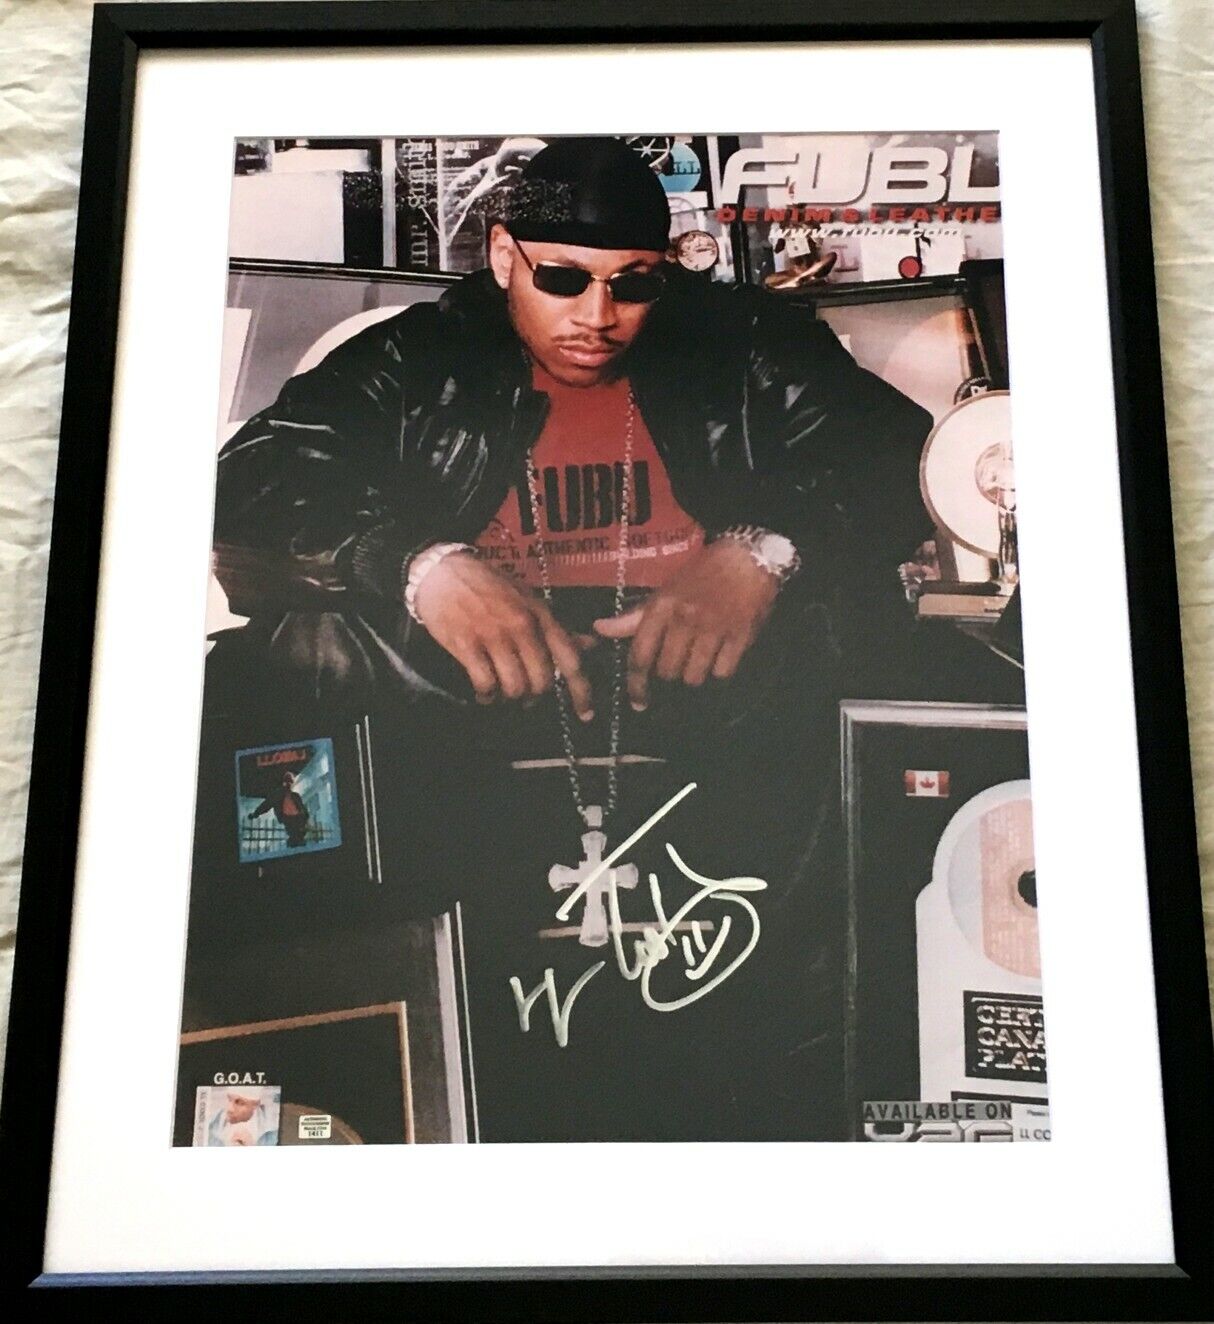 LL Cool J autographed signed autograph 16x20 poster size photo matted framed JSA